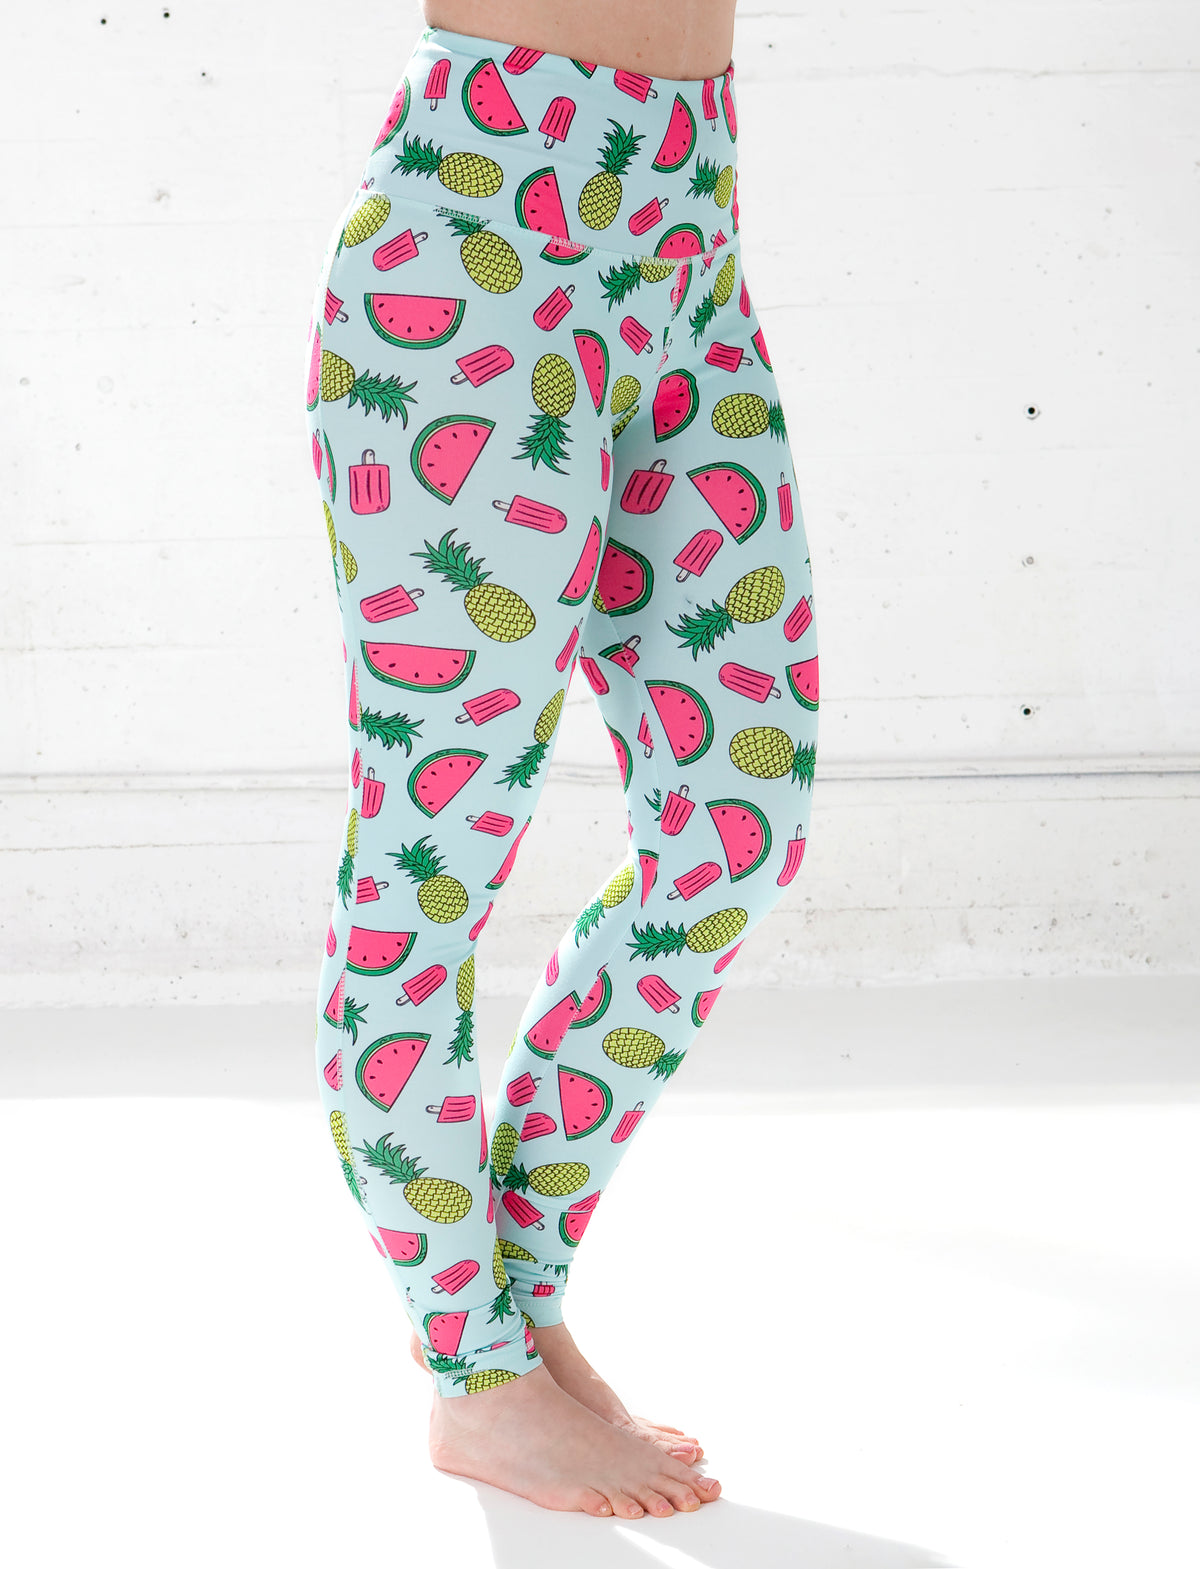 The LADIES HIGH RISE NOVELTY LEGGING Jill Yoga is available at the